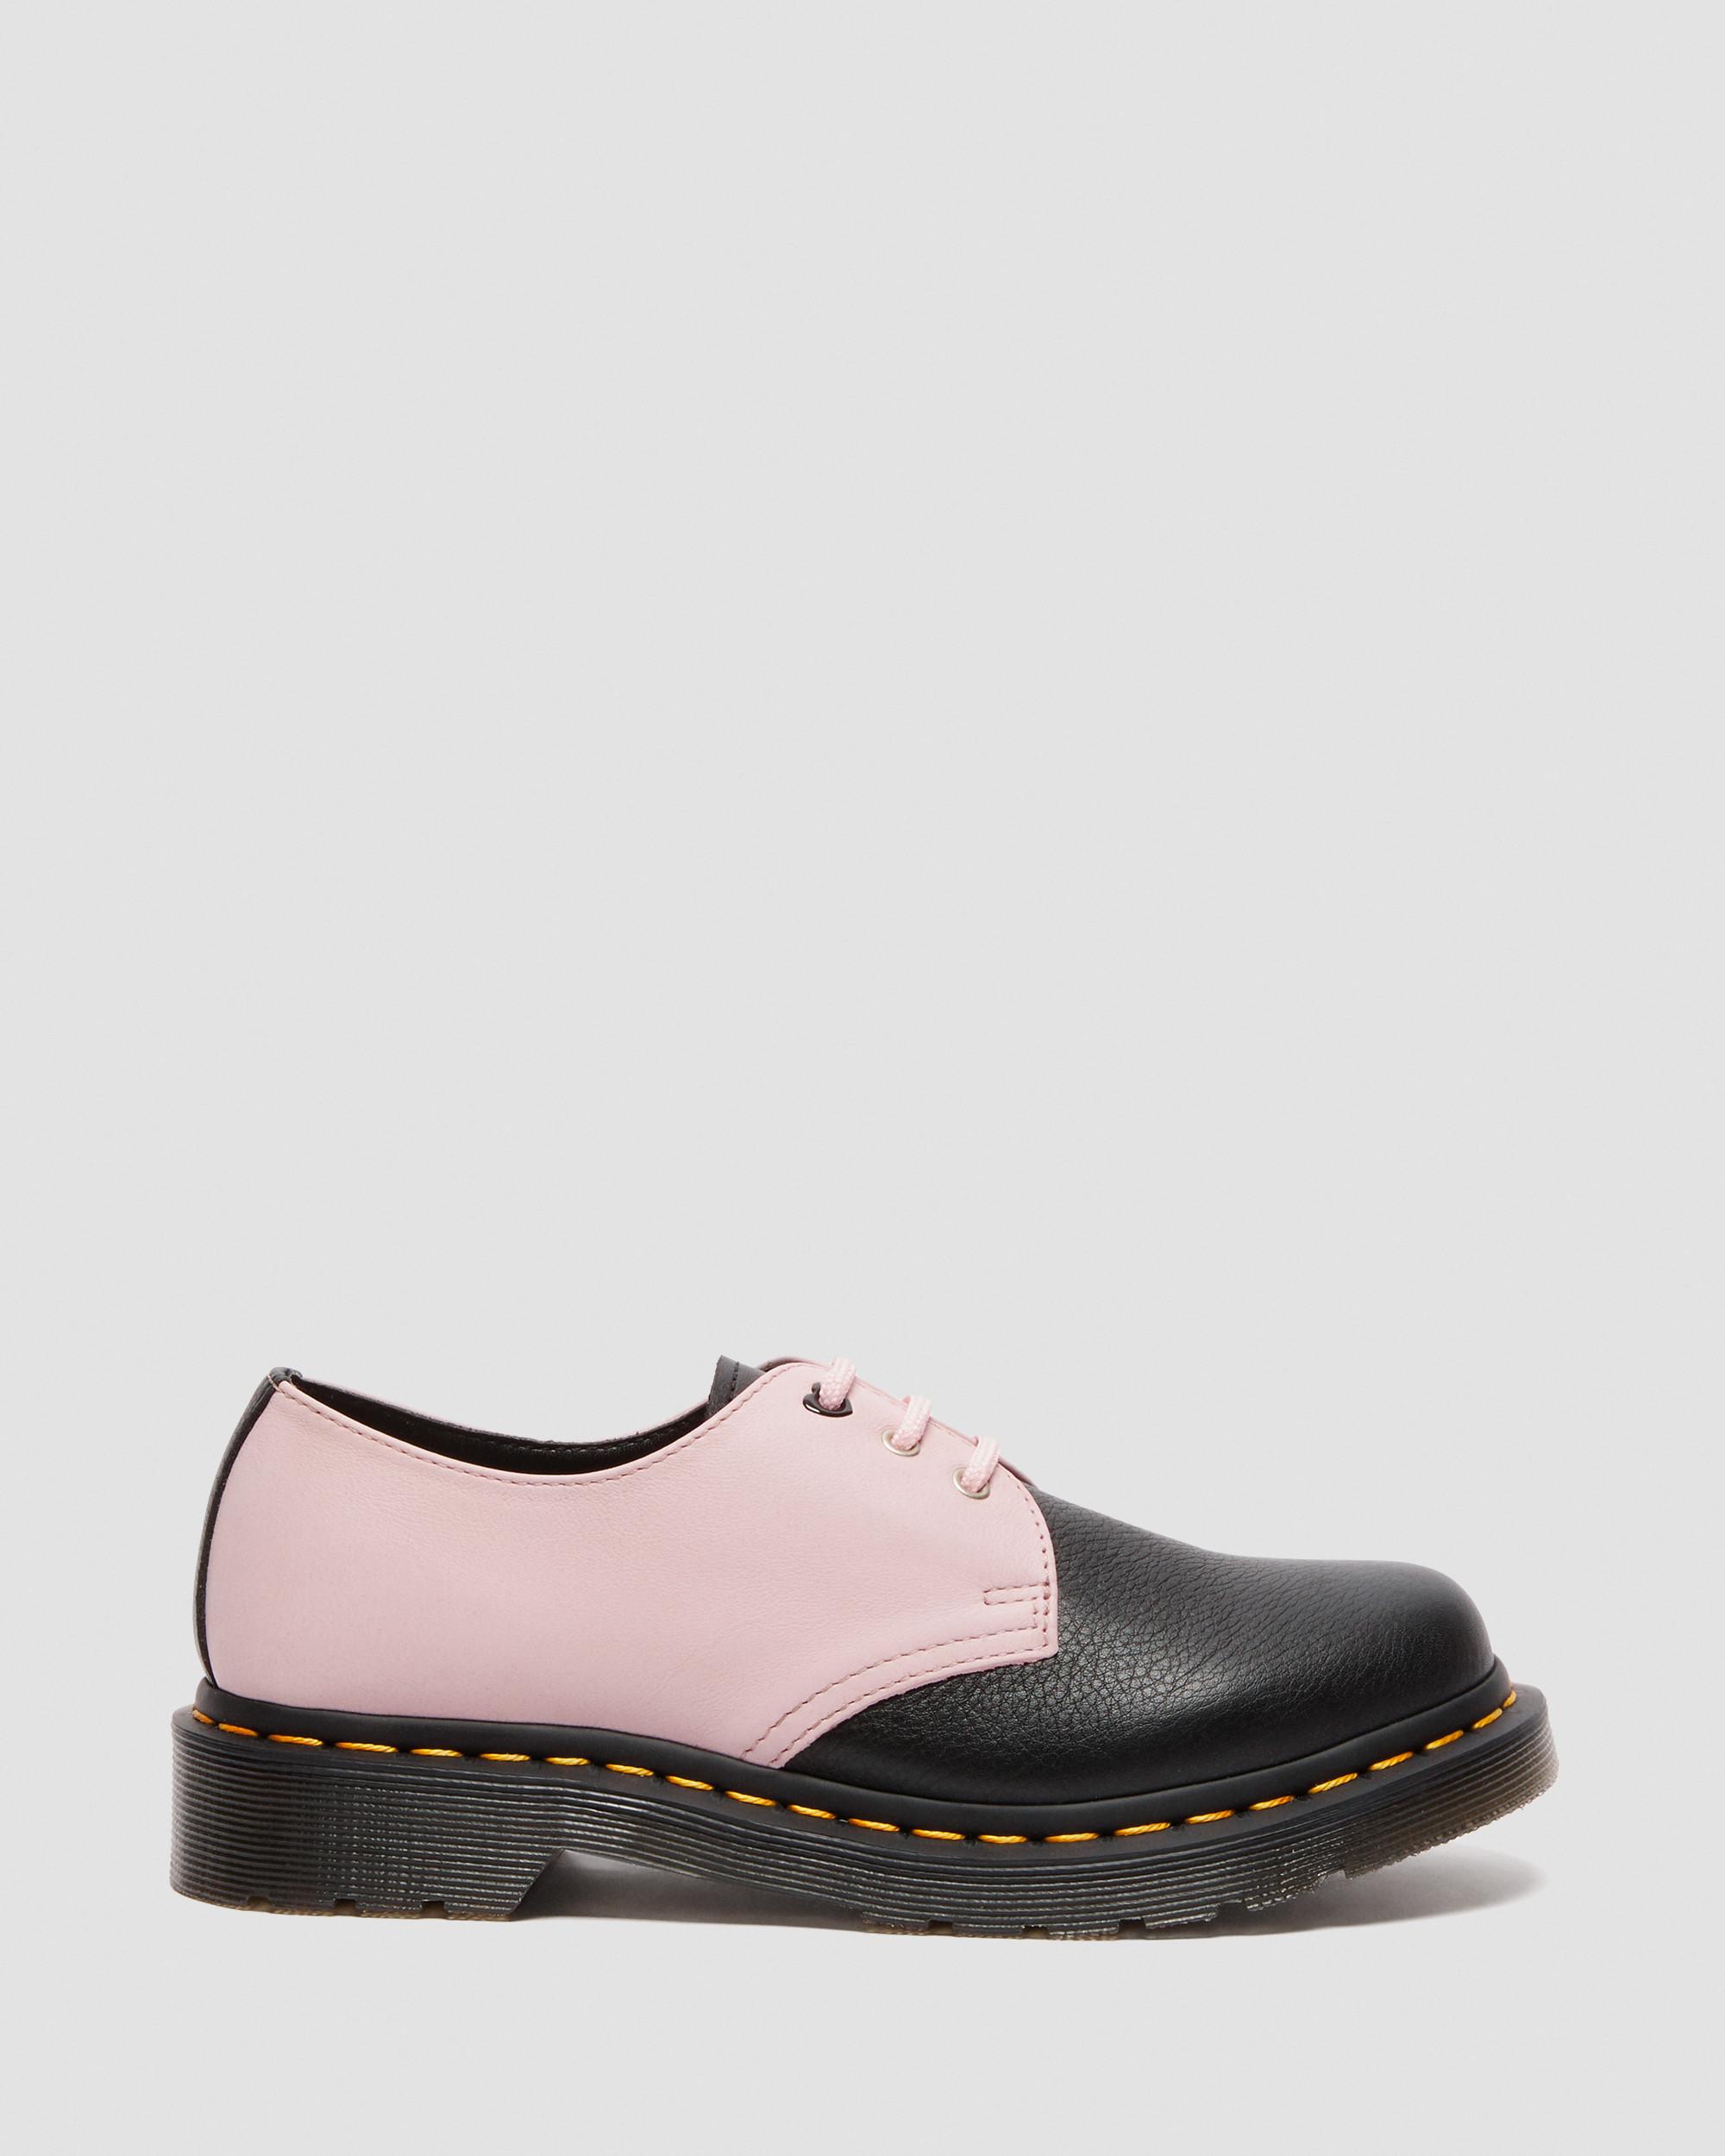 1461 Contrast Virginia Leather Oxford Shoes1461 Contrast Virginia Leather Oxford Shoes Dr. Martens